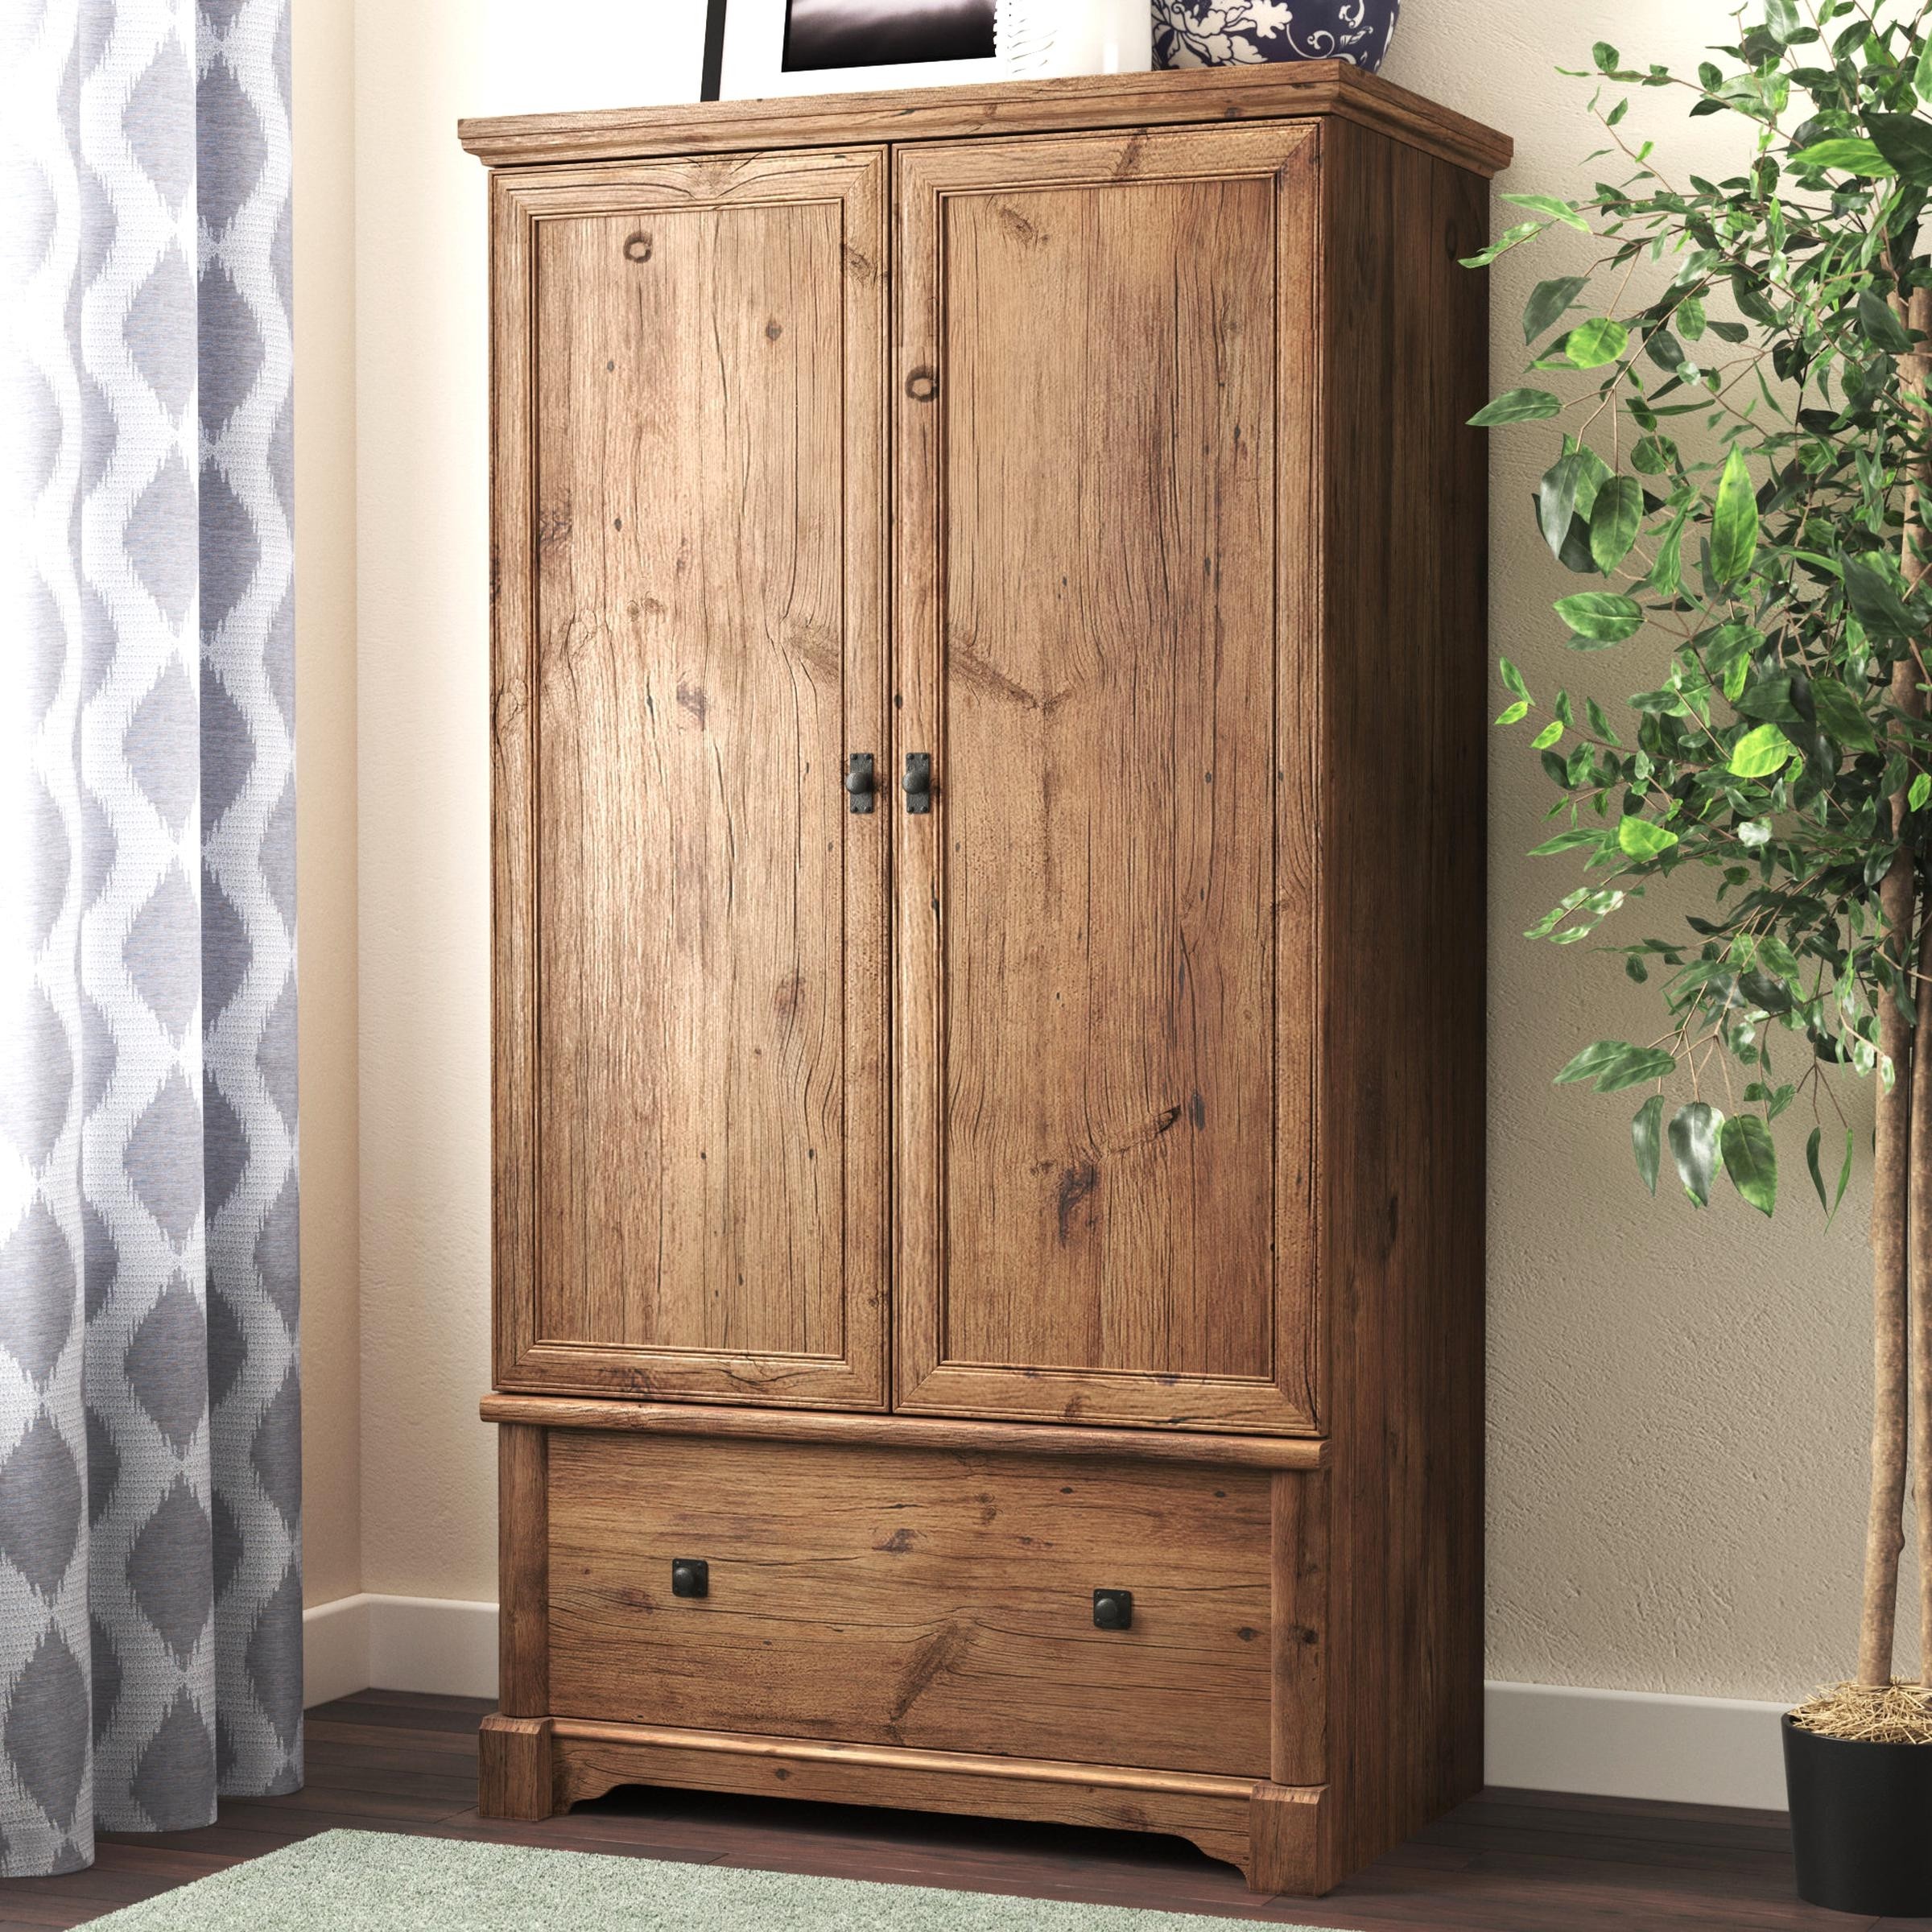 Armoire for sale in uk 89 second hand armoires